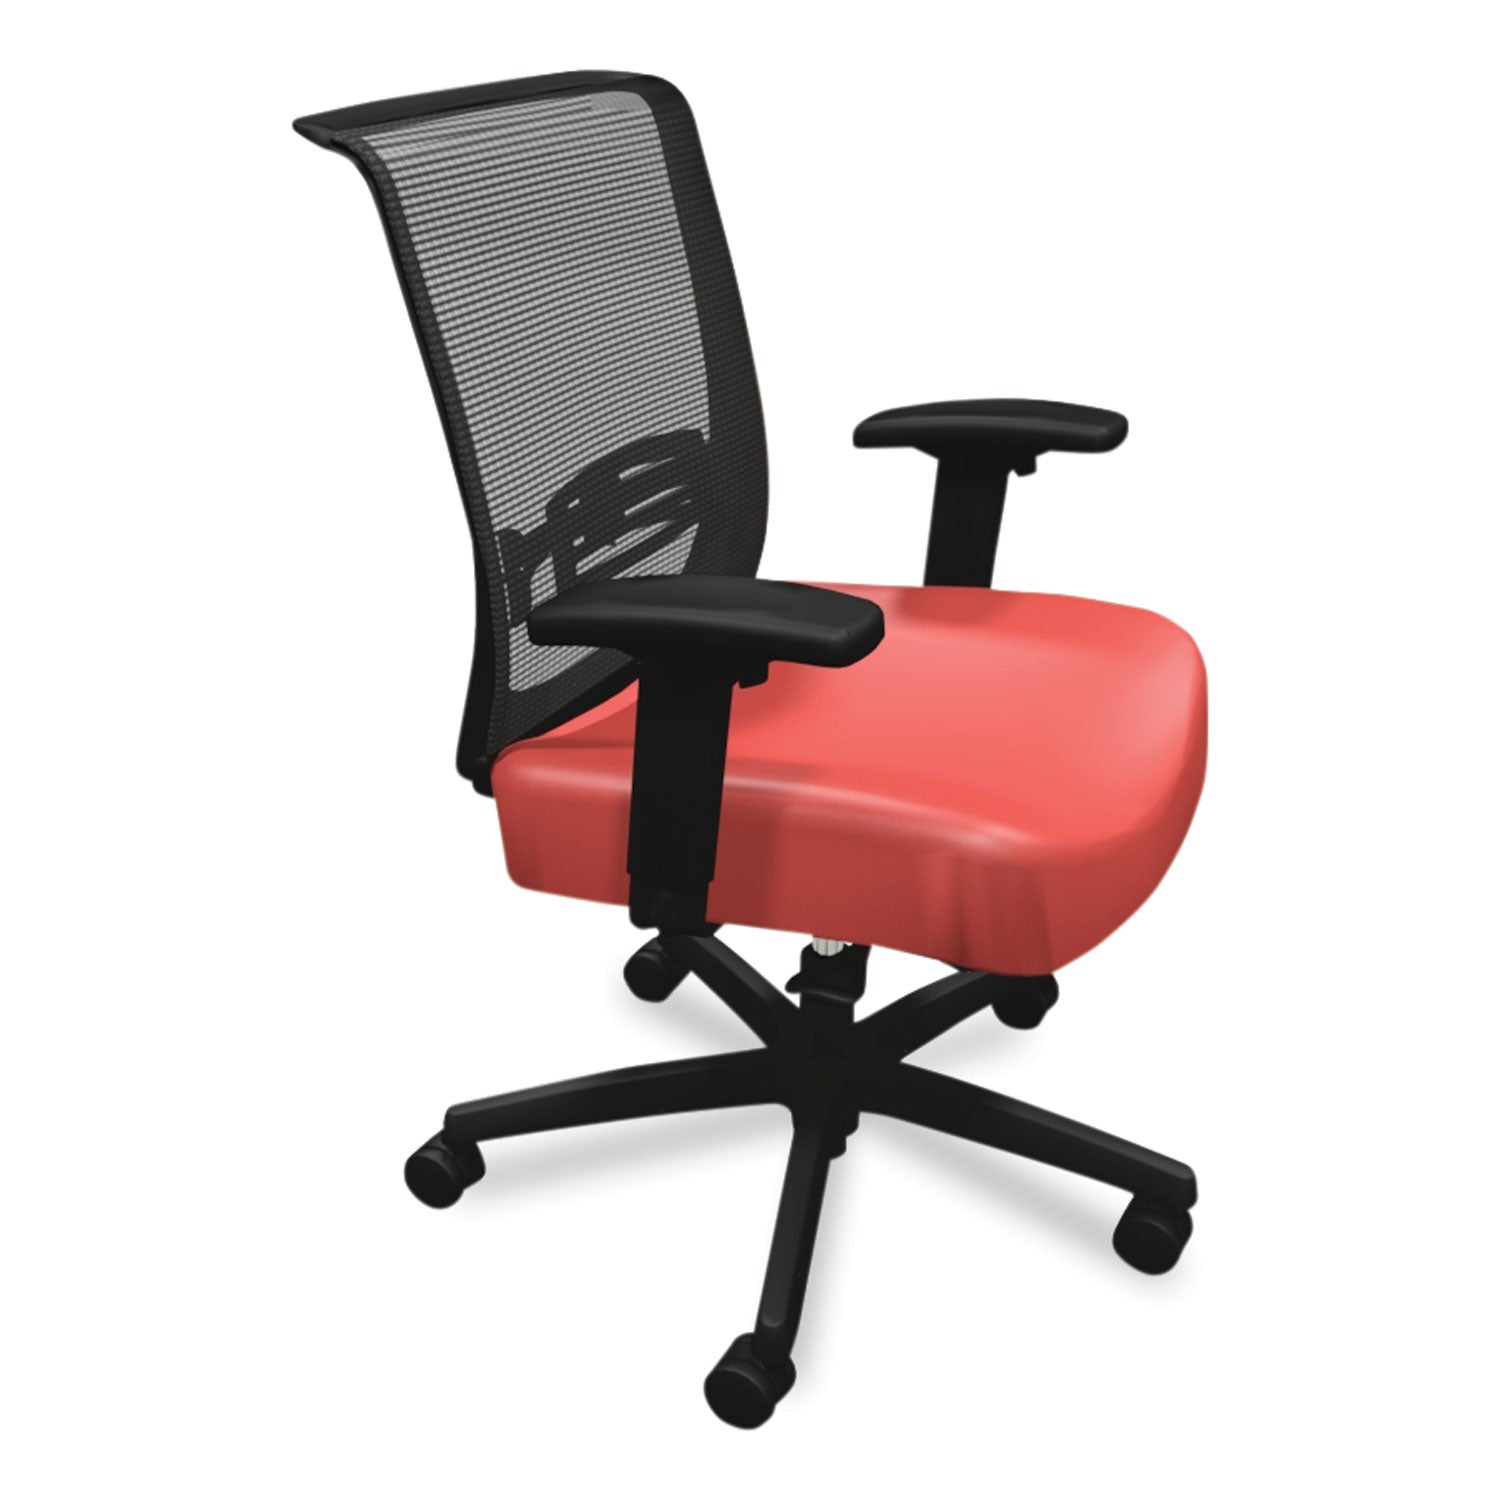 convergence-mid-back-task-chair-synchro-tilt-and-seat-glide-supports-up-to-275-lb-red-seat-black-back-base_honcmy1acu67 - 3